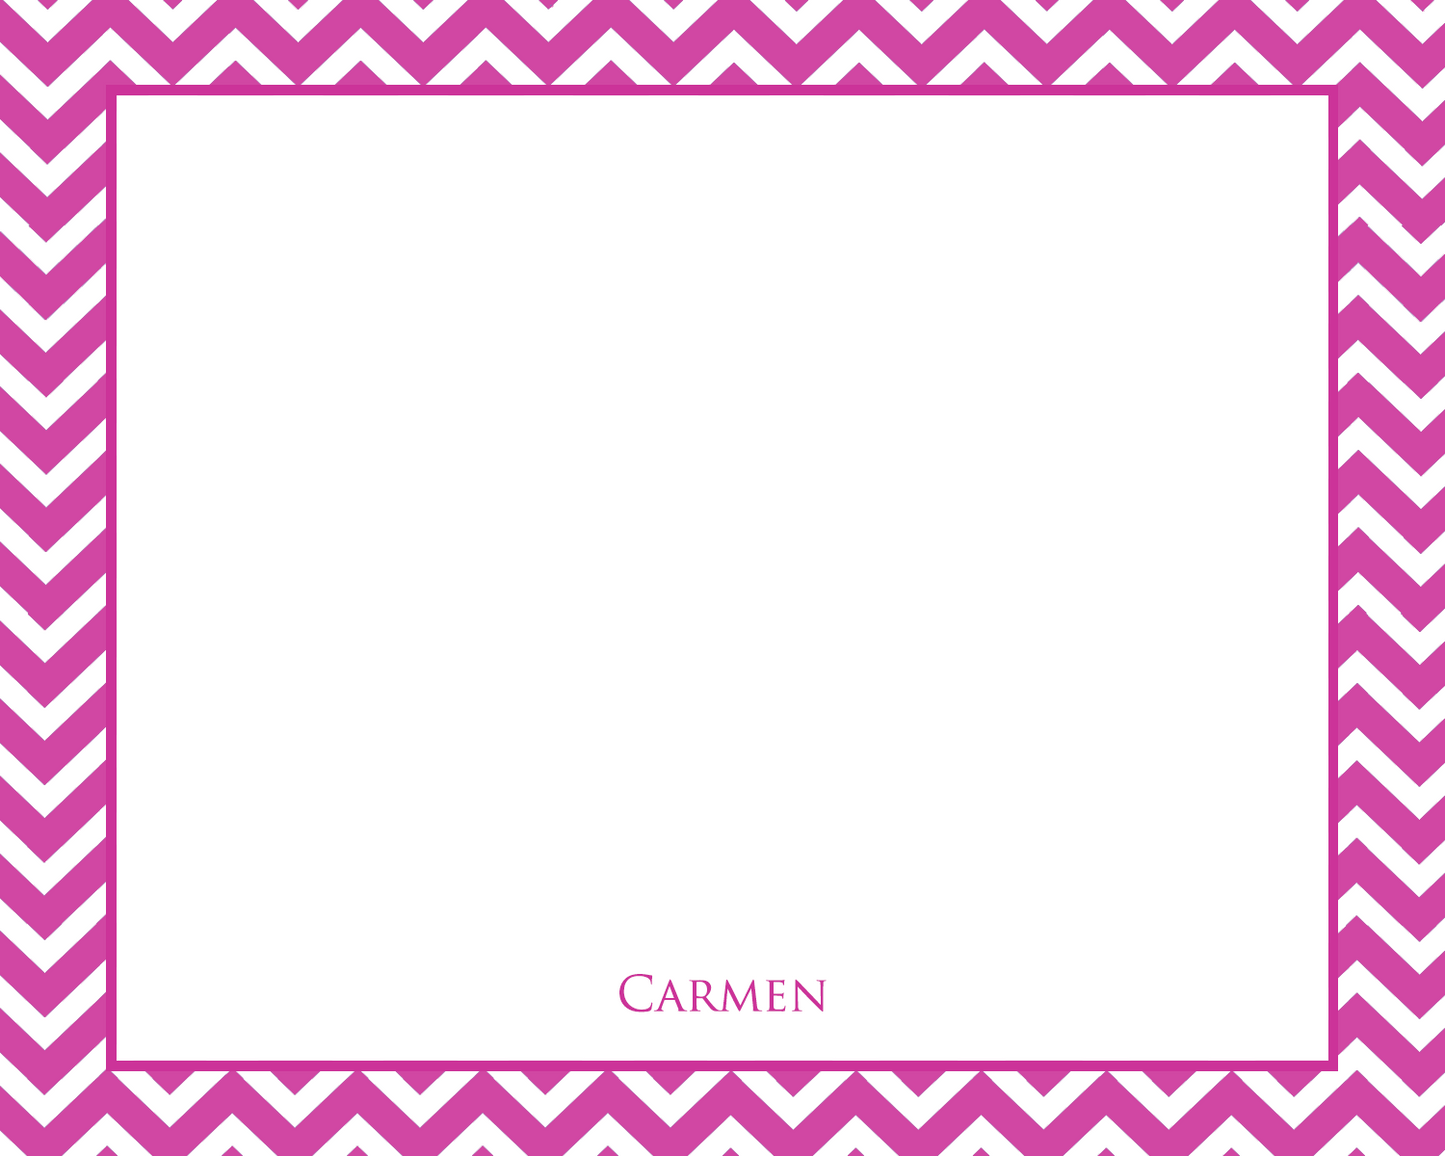 Carmen Personalized Gift Tags